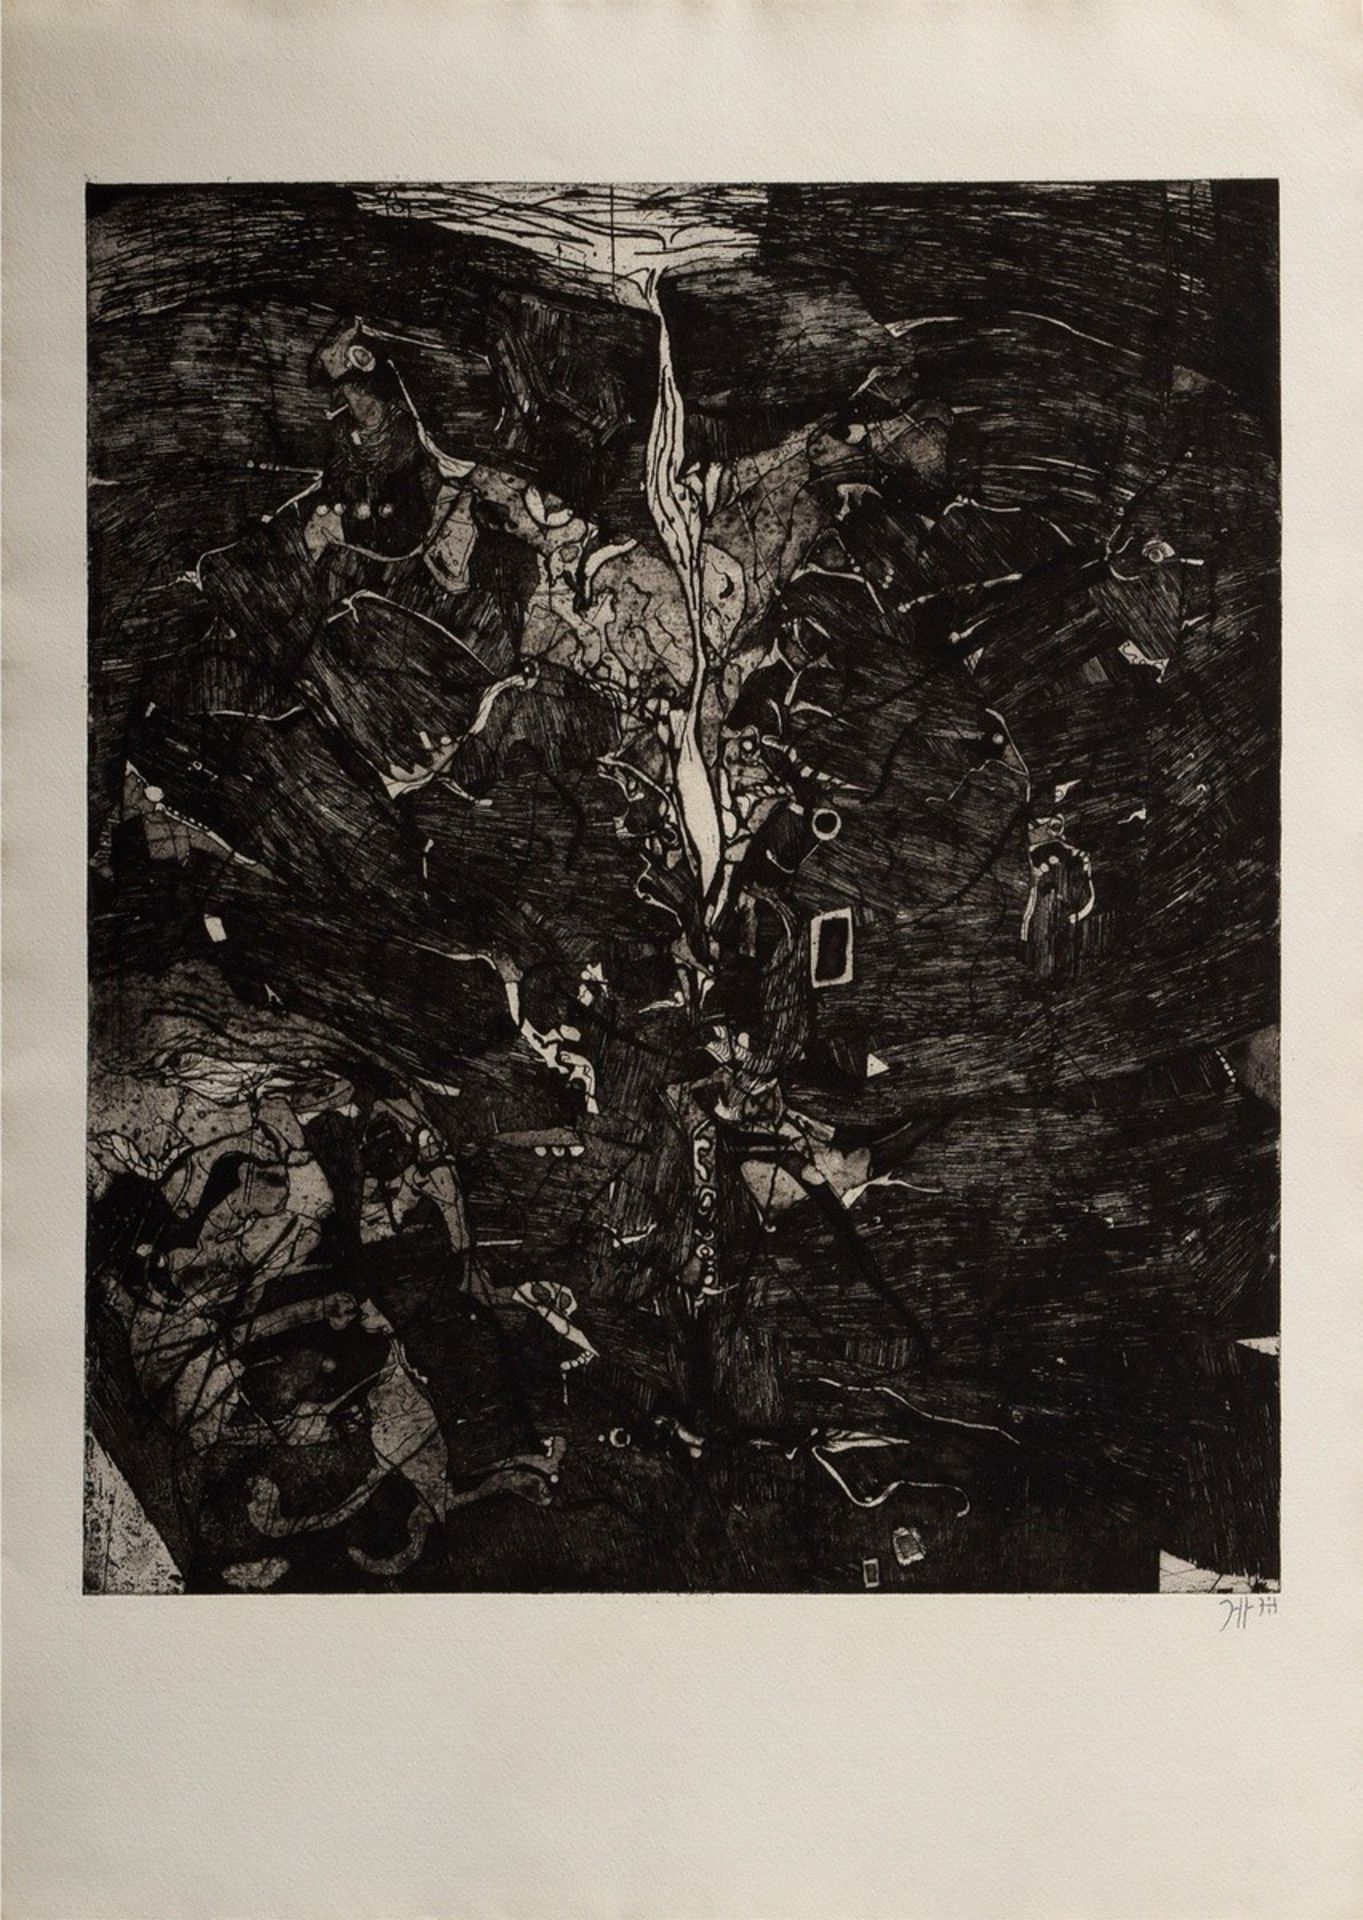 Janssen, Horst (1929-1995) "Old Mountain" 1964, etching, b.r. signed, outside the edition of 25, sm - Image 2 of 3